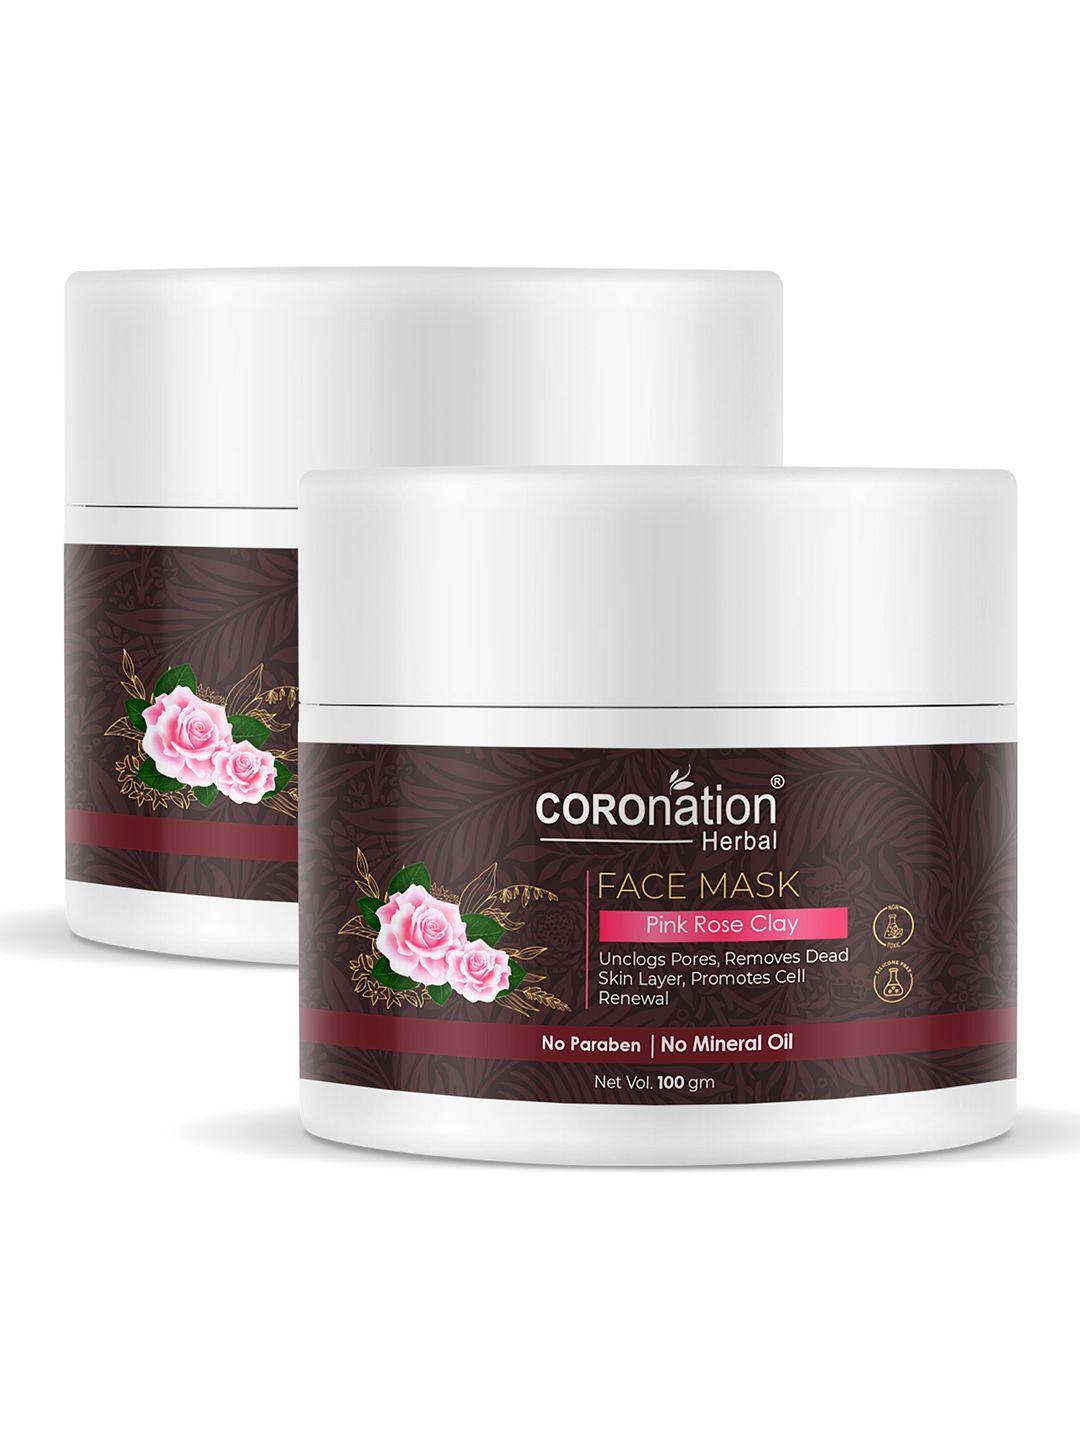 coronation herbal set of 2 pink rose clay face masks for cell renewal - 100 g each